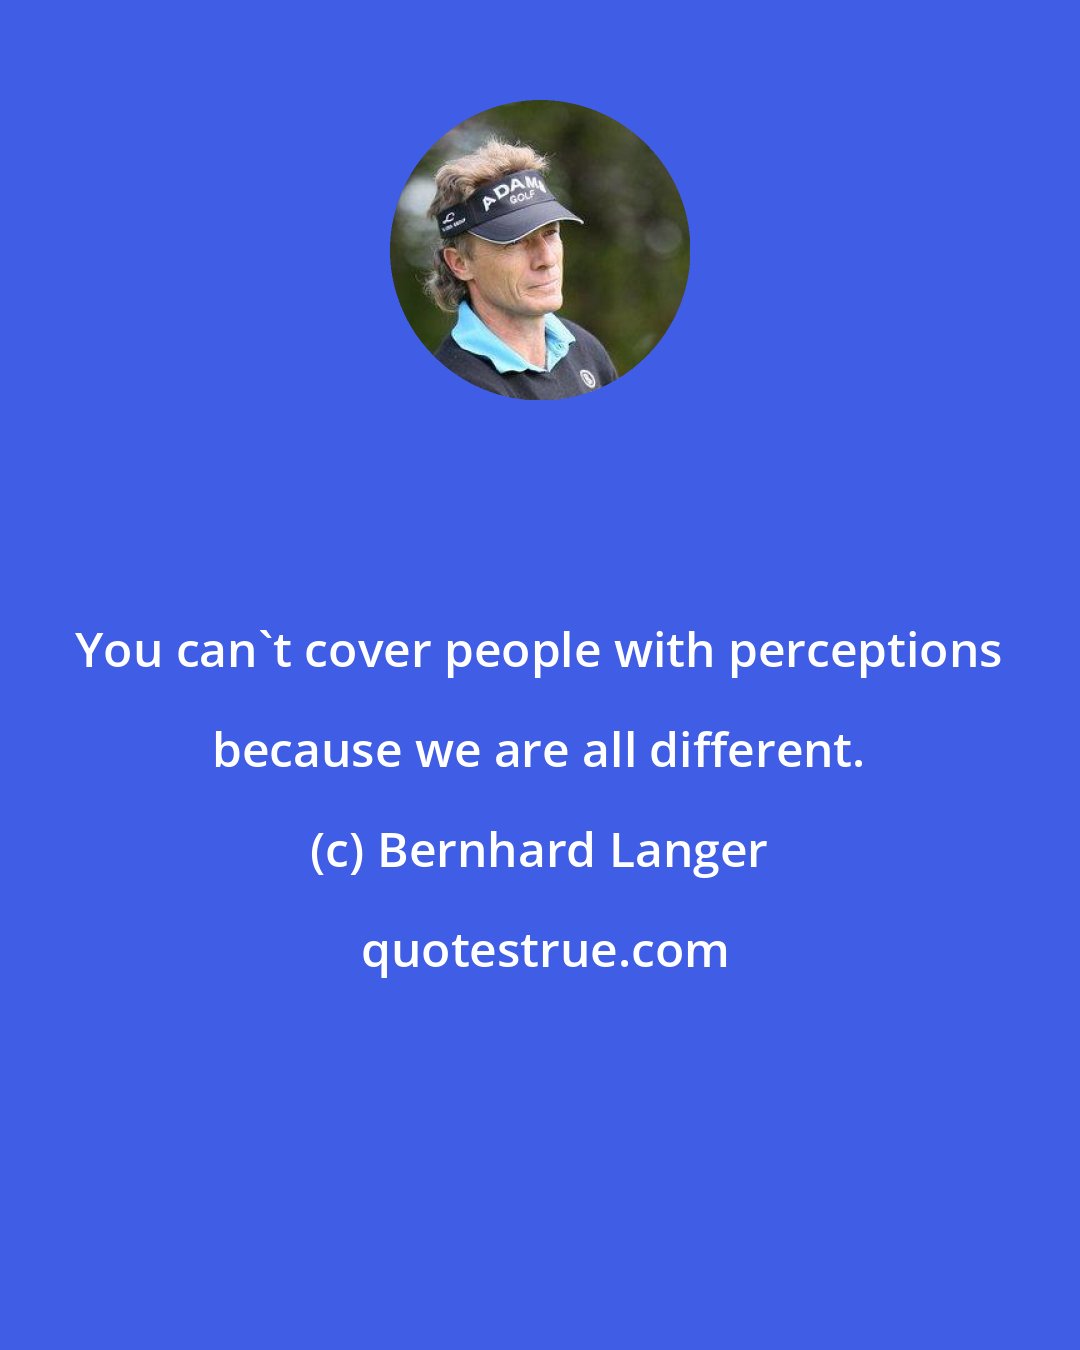 Bernhard Langer: You can't cover people with perceptions because we are all different.